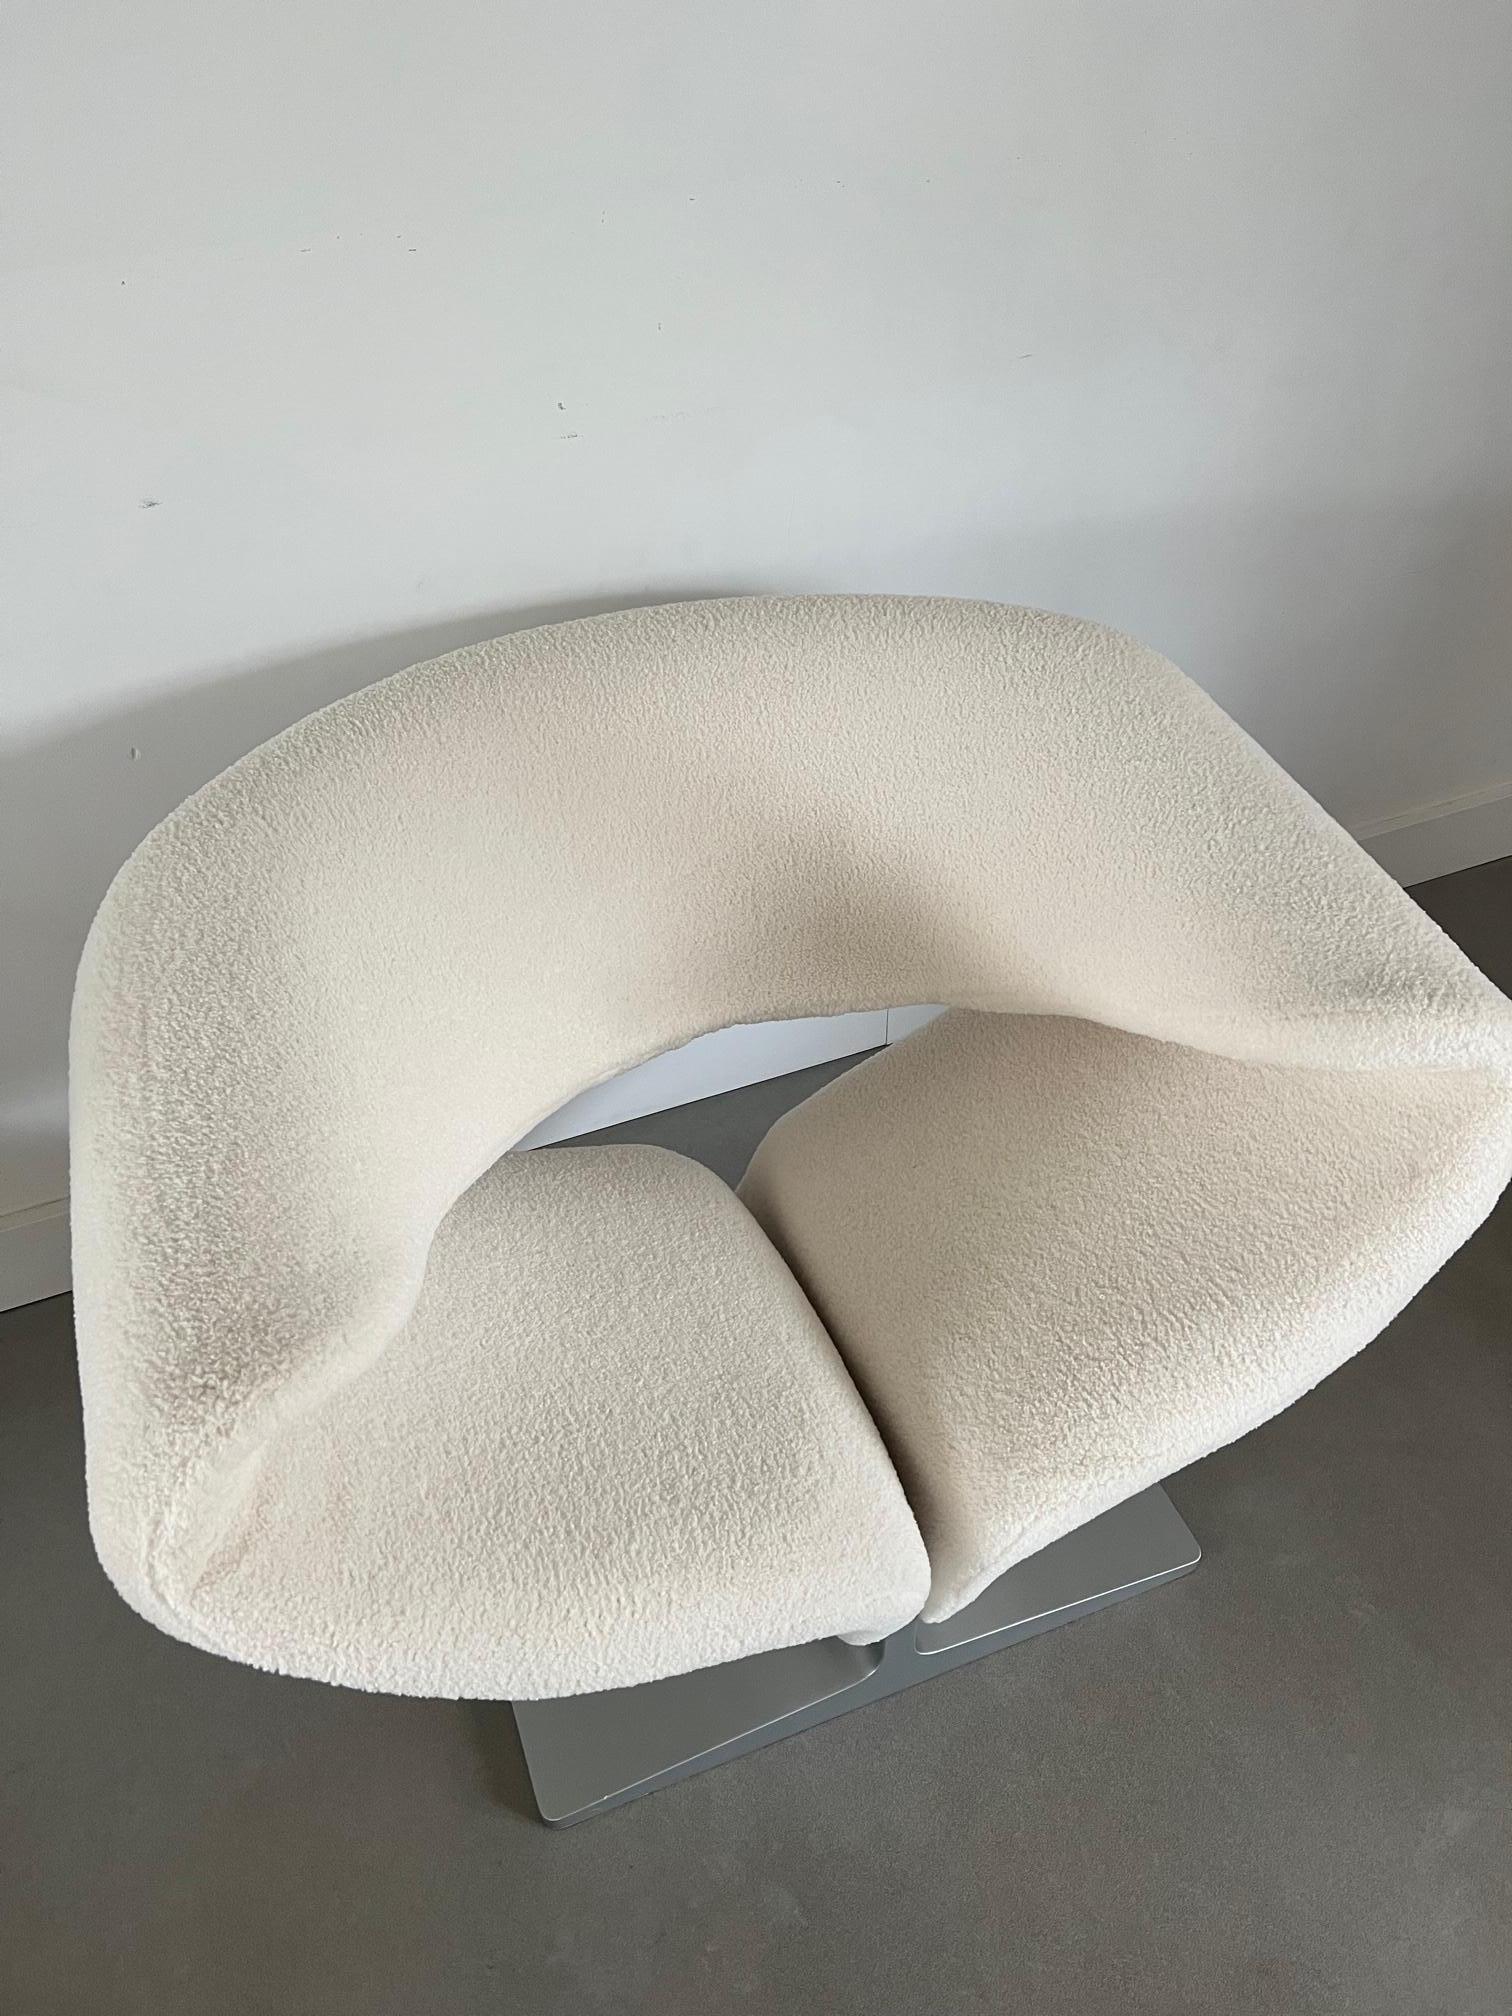 The Ribbon chair is a modernist furniture design by French designer Pierre Paulin, first presented in 1966. The chair is known for its flowing, organic form that resembles a ribbon or a shell, and its use of advanced materials for the time.

The